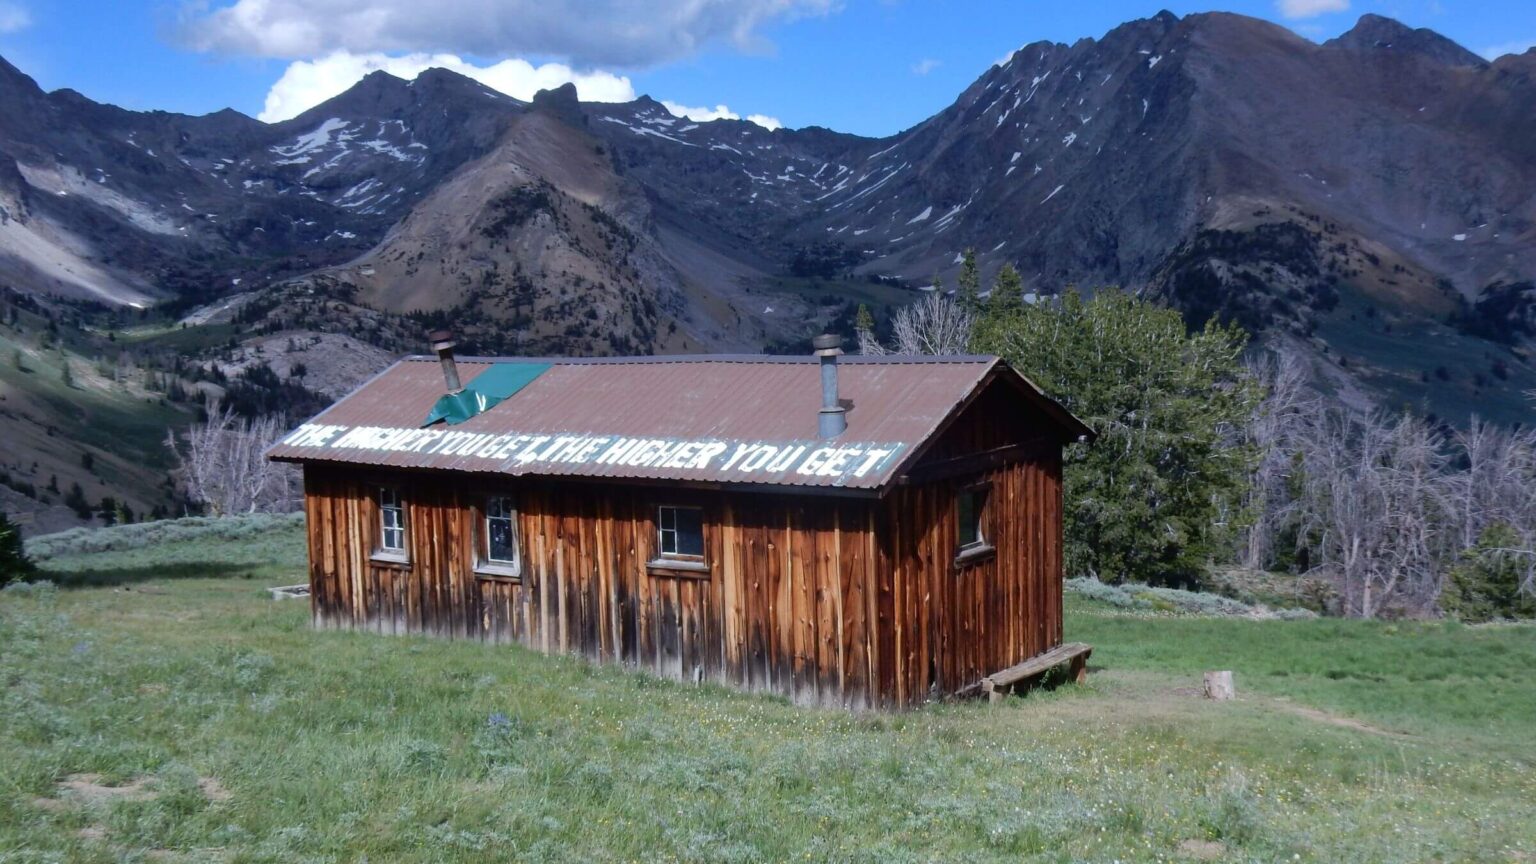 Pioneer Wilderness Study Area, iconic Pioneer Cabin, July